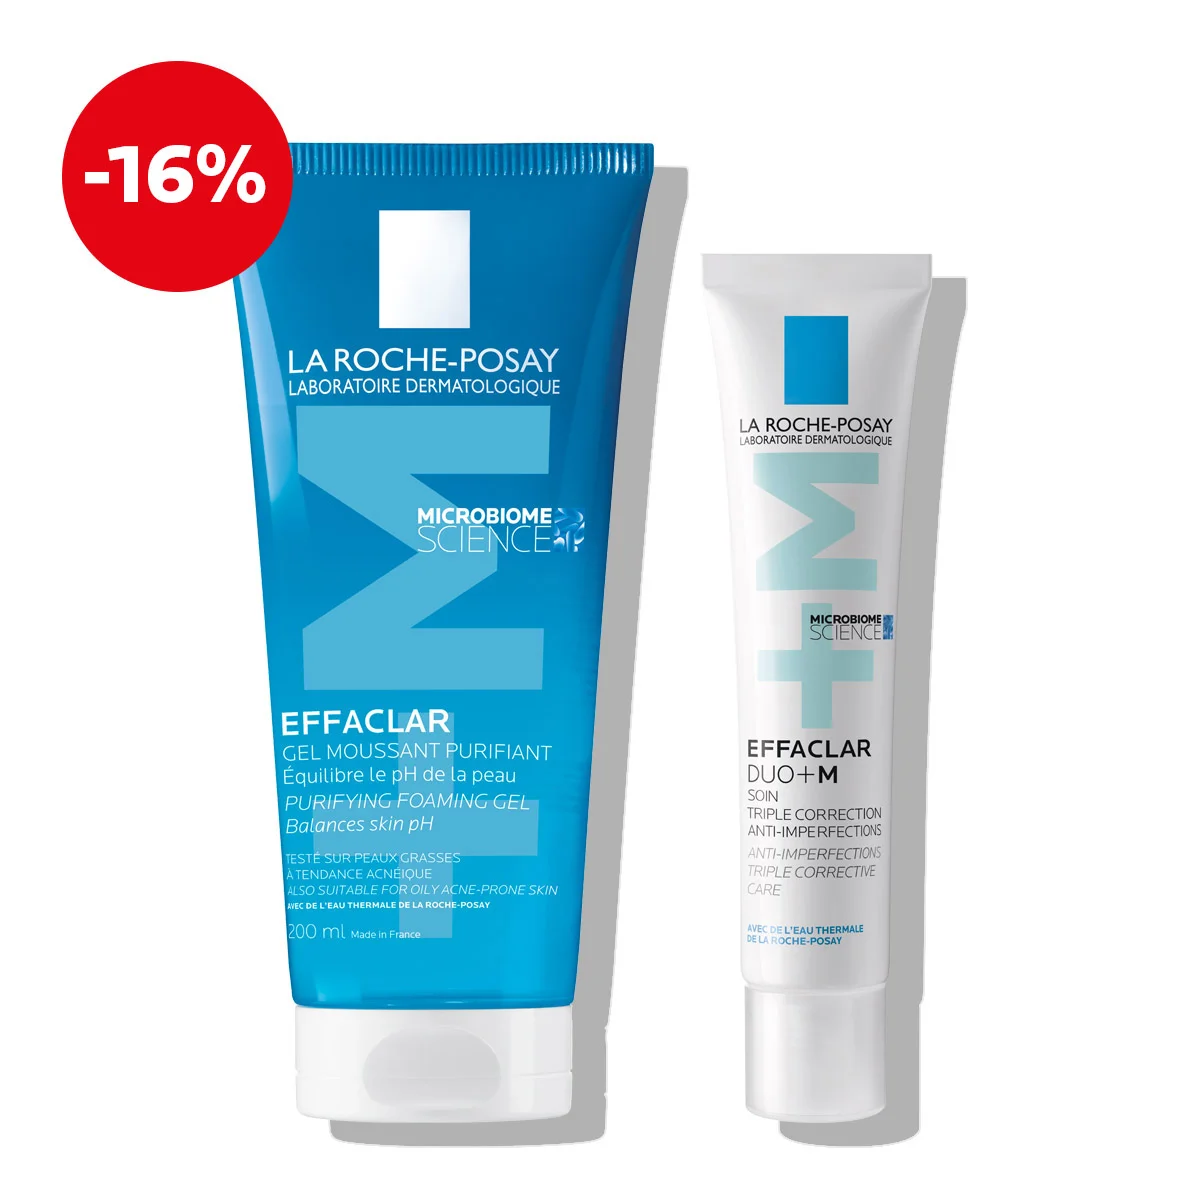 La Roche-Posay EFFACLAR Protocol for skin prone to acne and irregularities (cleansing and care) (1)